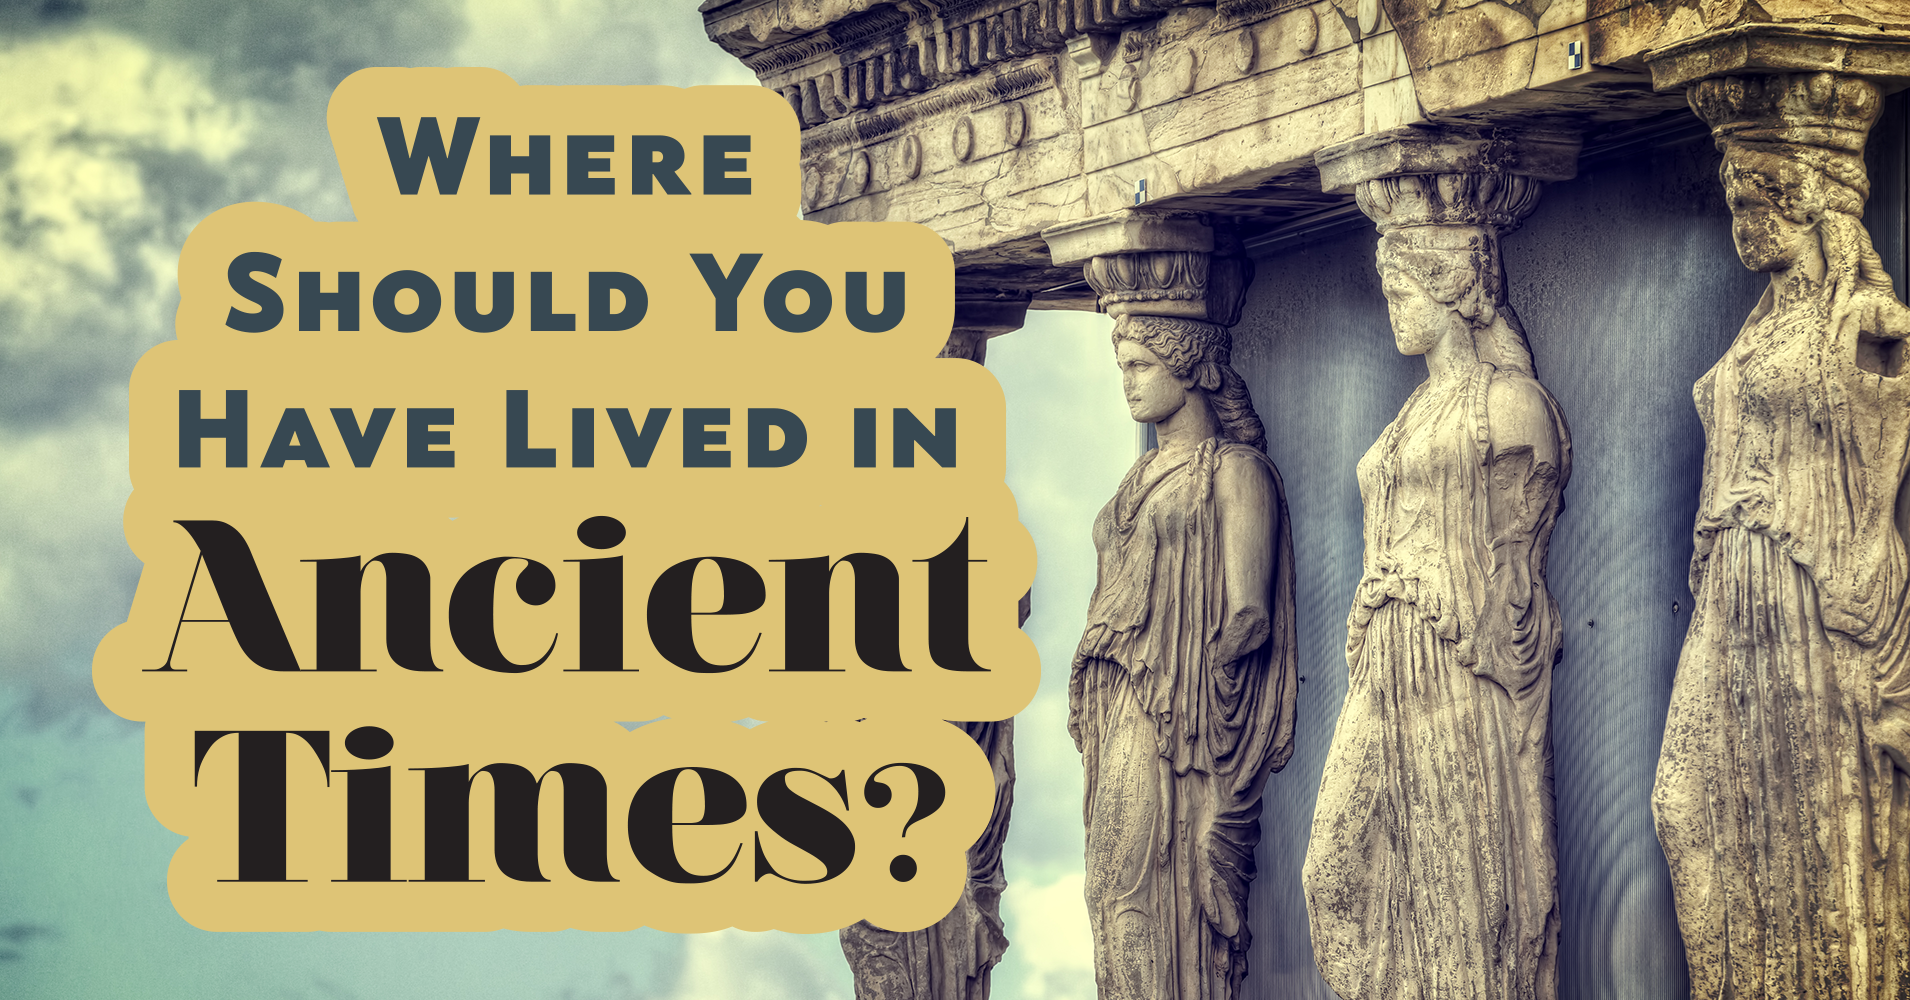 Where Should You Have Lived in Ancient Times? Question 1 - ImageForSharing